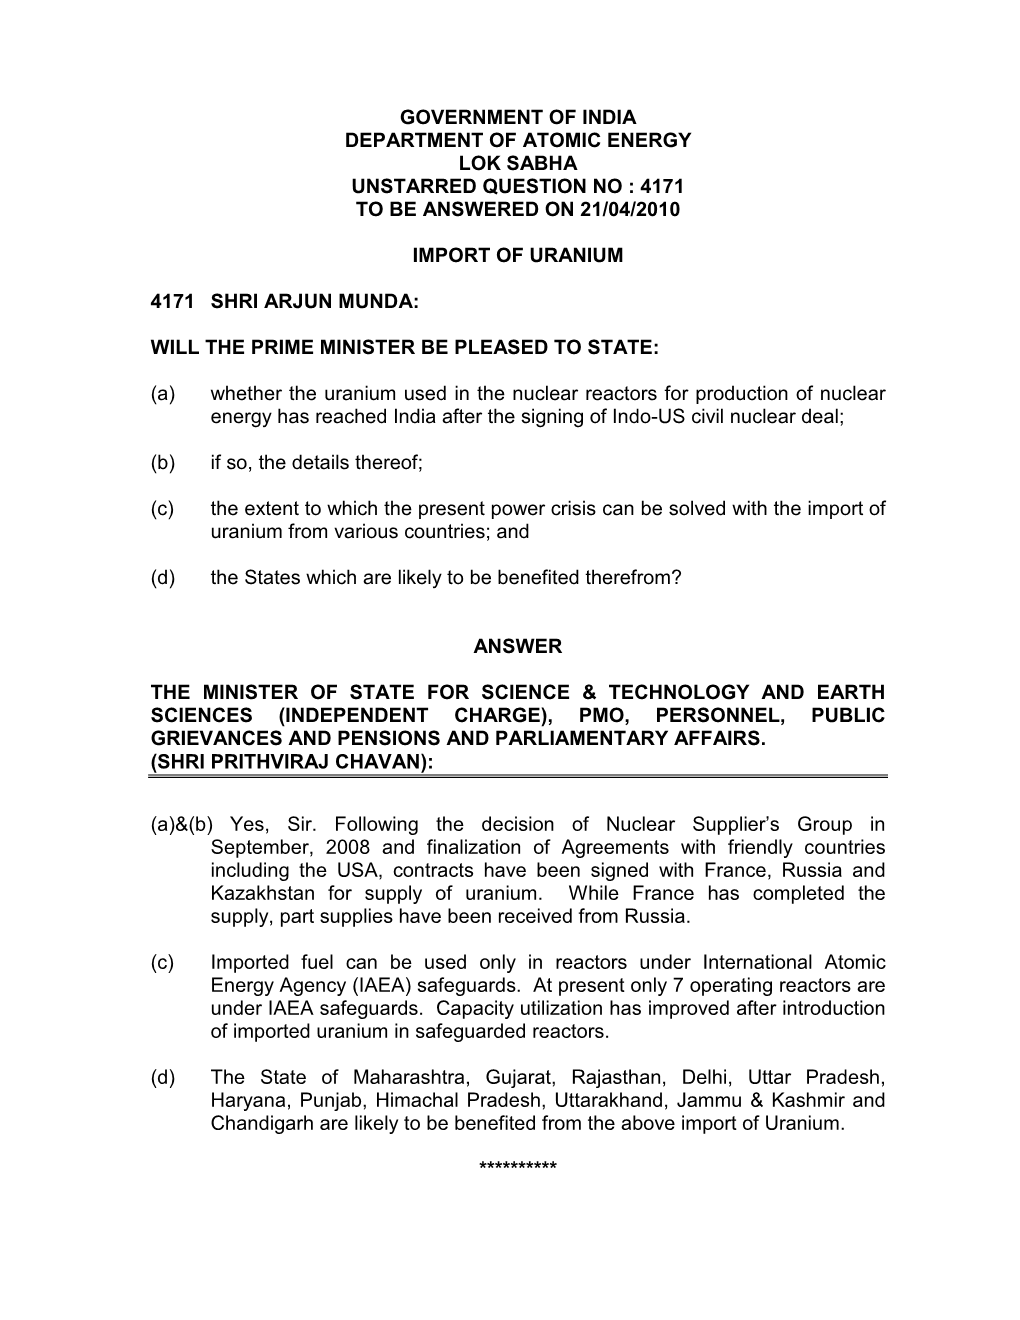 Government of India Department of Atomic Energy Lok Sabha Unstarred Question No : 4171 to Be Answered on 21/04/2010